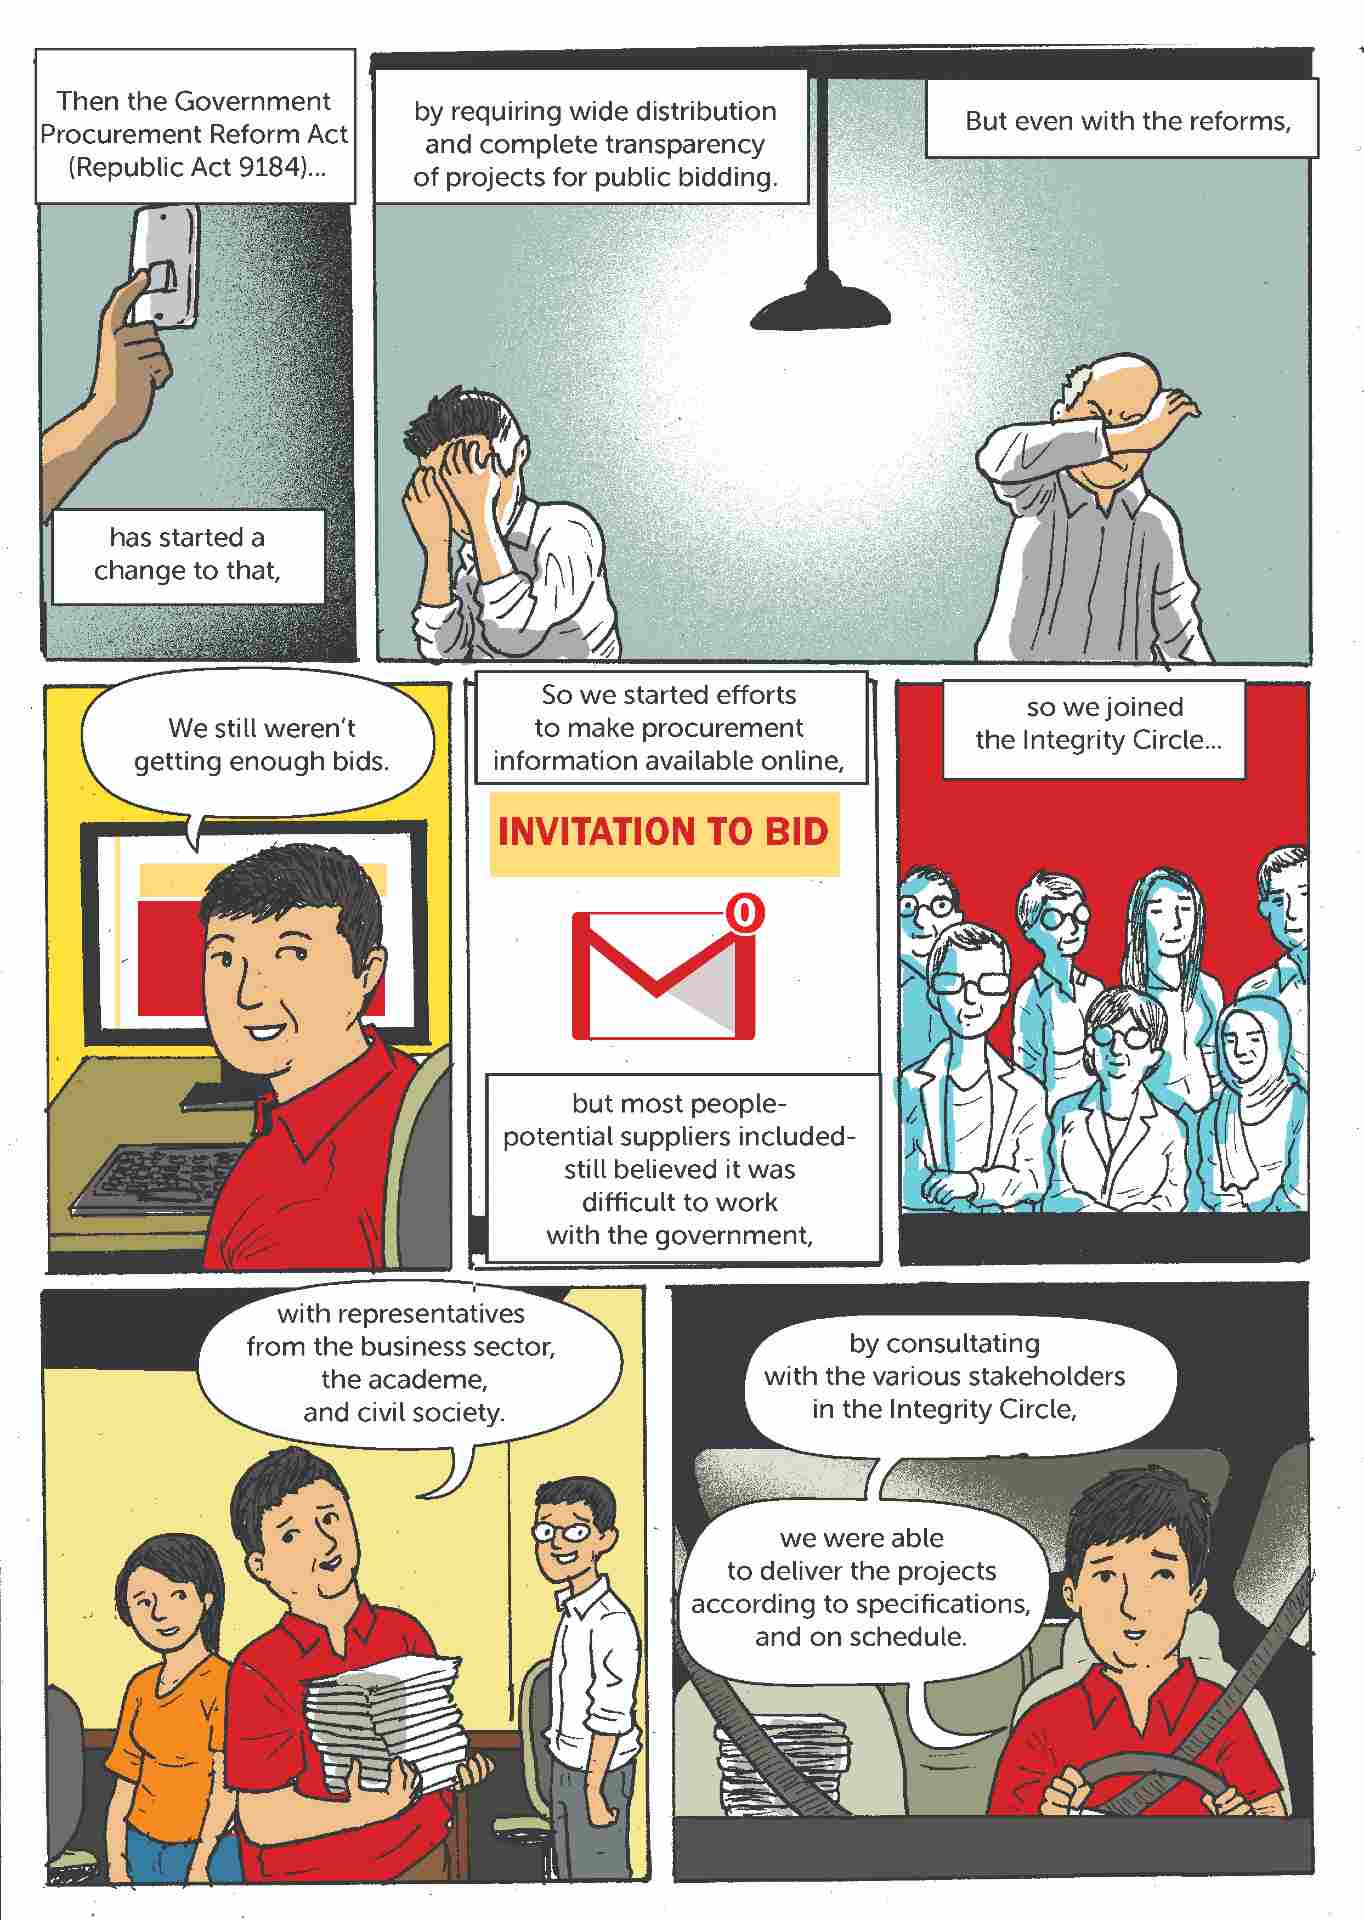 Comic strip about open contracting in the Philippines 4